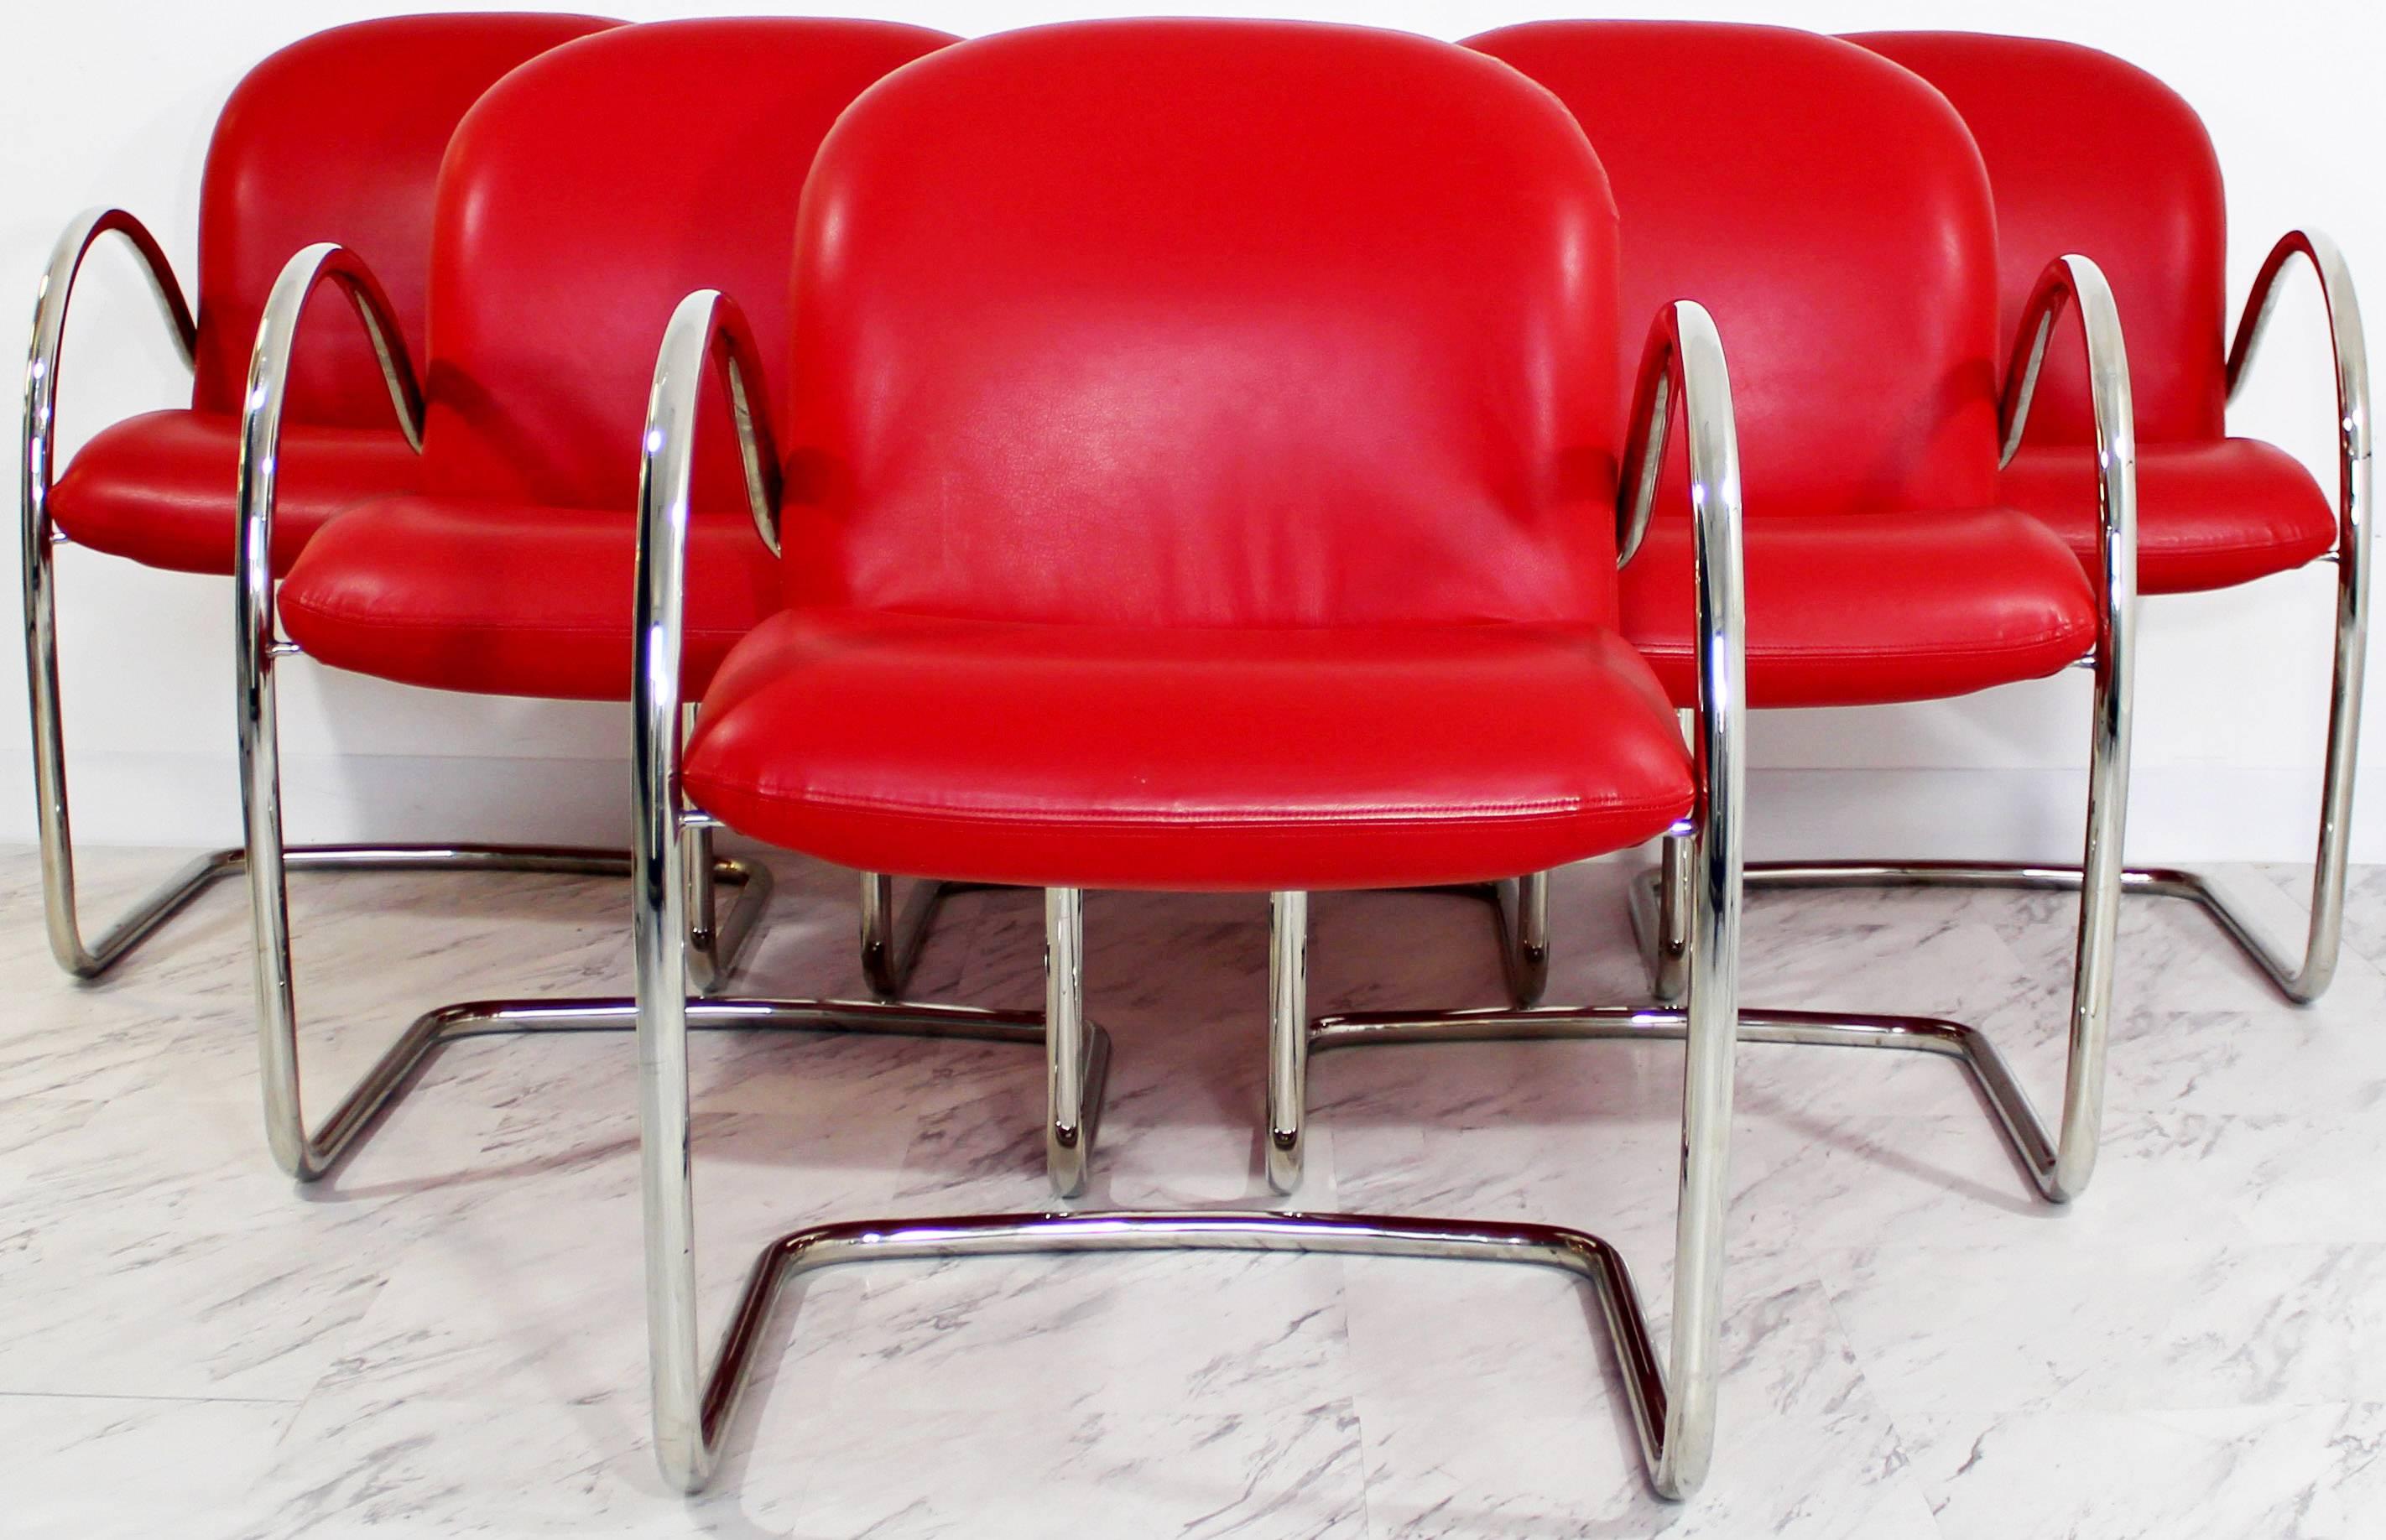 For your consideration is a brilliant set of six, red leather and chrome, dining chairs with arms by Brueton. In excellent condition. The dimensions are 22" Sq x 32" H x 18" S.H.